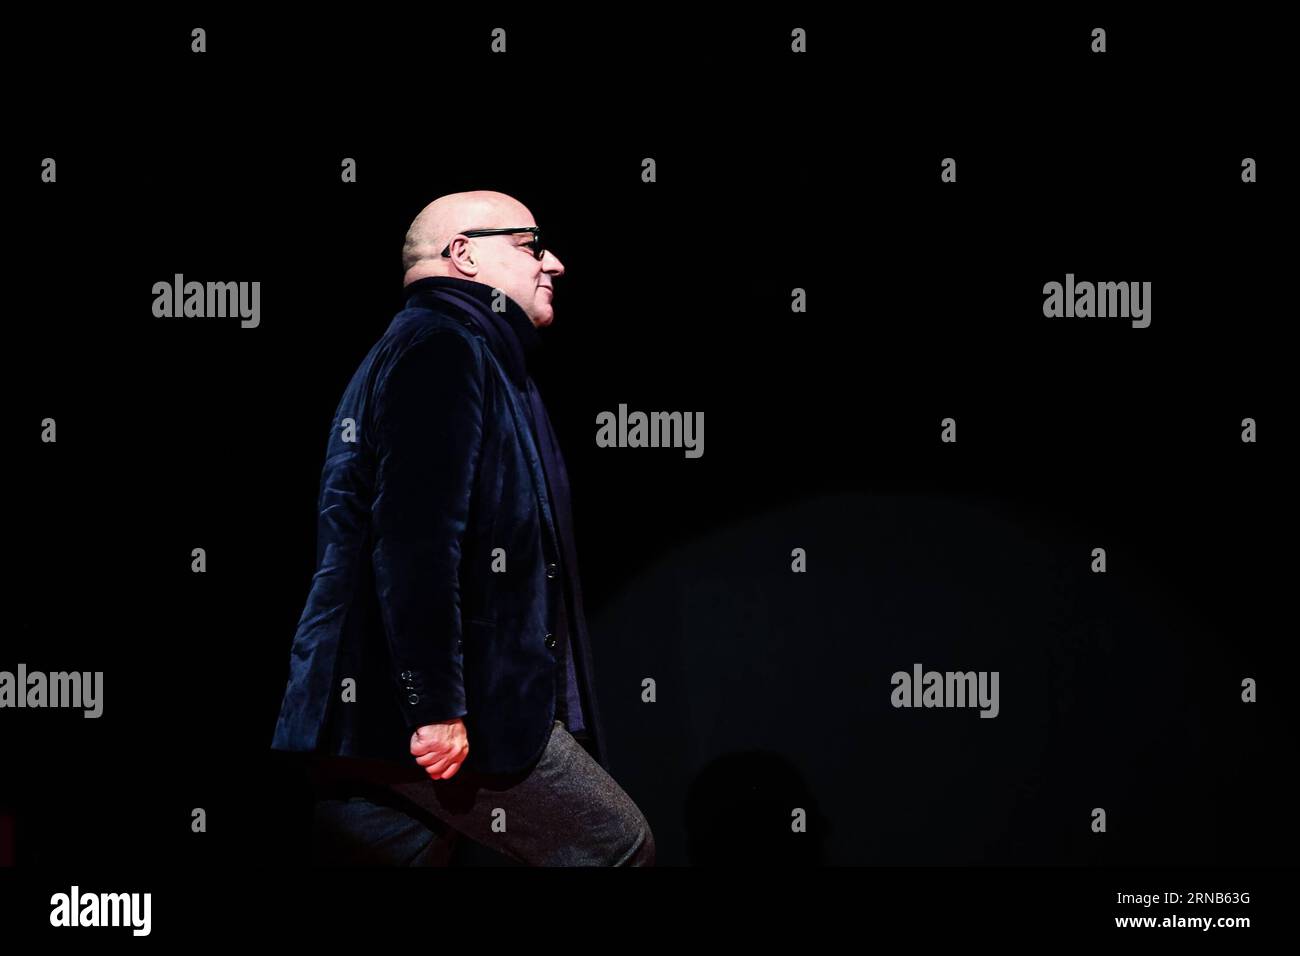 Italian director Gianfranco Rosi steps on stage to receive the Golden Bear for Best Film for the film Fire at Sea during the awards ceremony of the 66th Berlinale International Film Festival in Berlin, Germany, Feb. 20, 2016. The Italian documentary film Fire at Sea won the Golden Bear, the top jury prize awarded to the best film, in the 66th Berlin International Film Festival on Saturday. ) GERMANY-BERLIN-BERLINALE INTERNATIONAL FILM FESTIVAL-AWARDS CEREMONY-GOLD BEAR-GIANFRANCO ROSI ZhangxFan PUBLICATIONxNOTxINxCHN   Italian Director Gian Franco Rosi Steps ON Stage to receive The Golden Bear Stock Photo